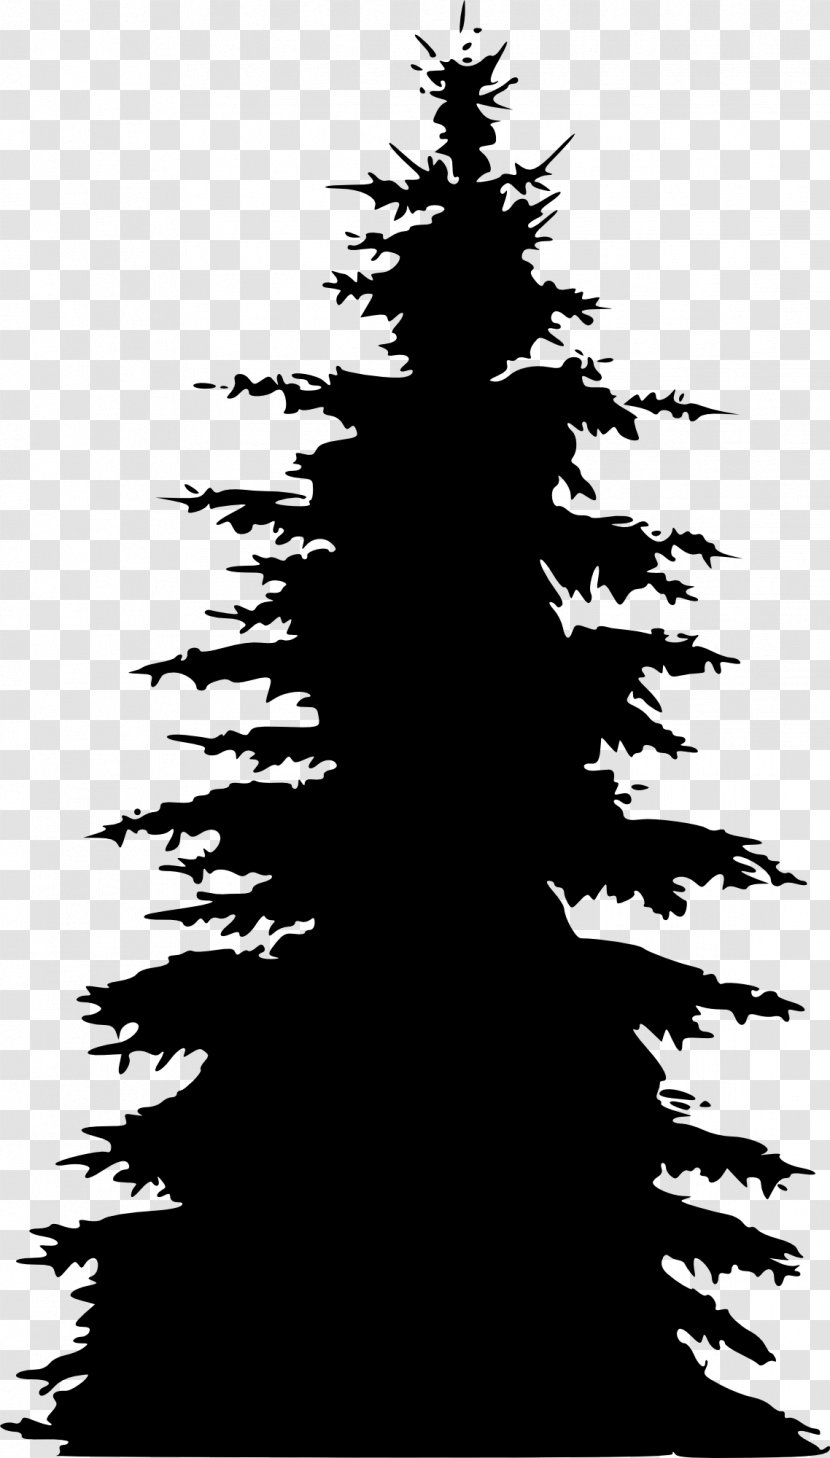 Pine Fir Spruce Tree Silhouette - Monochrome Photography Transparent PNG